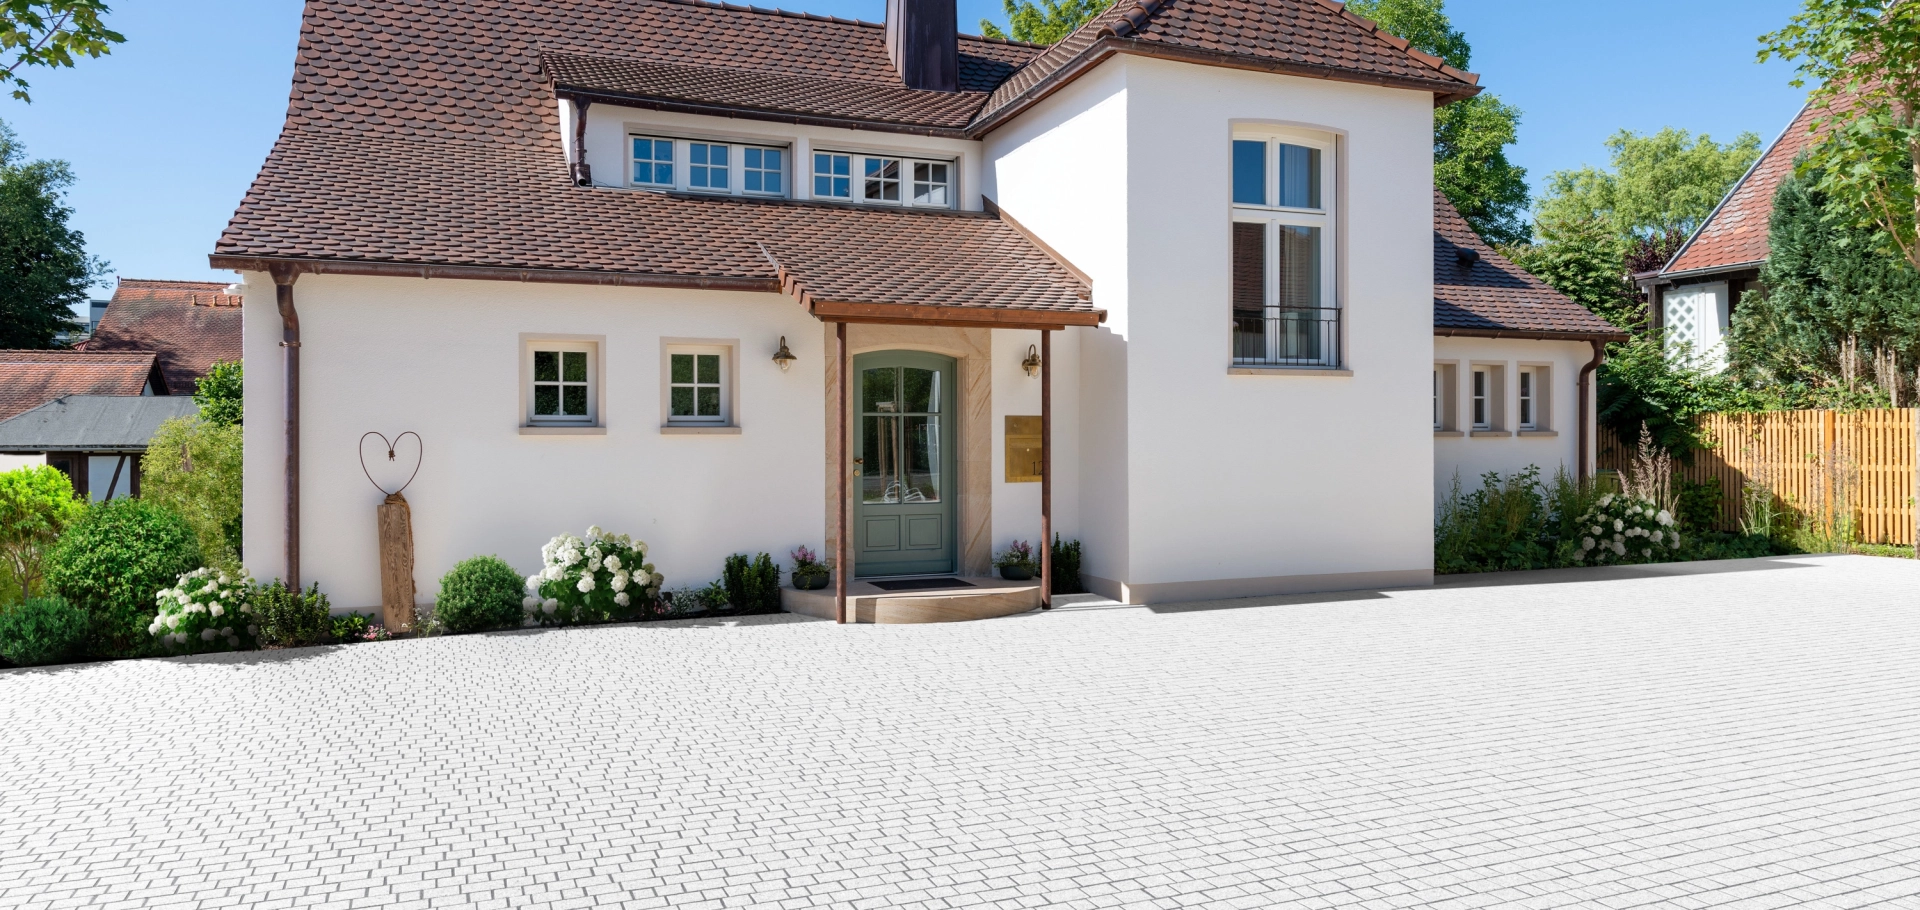 Driveway paving system with a natural stone look